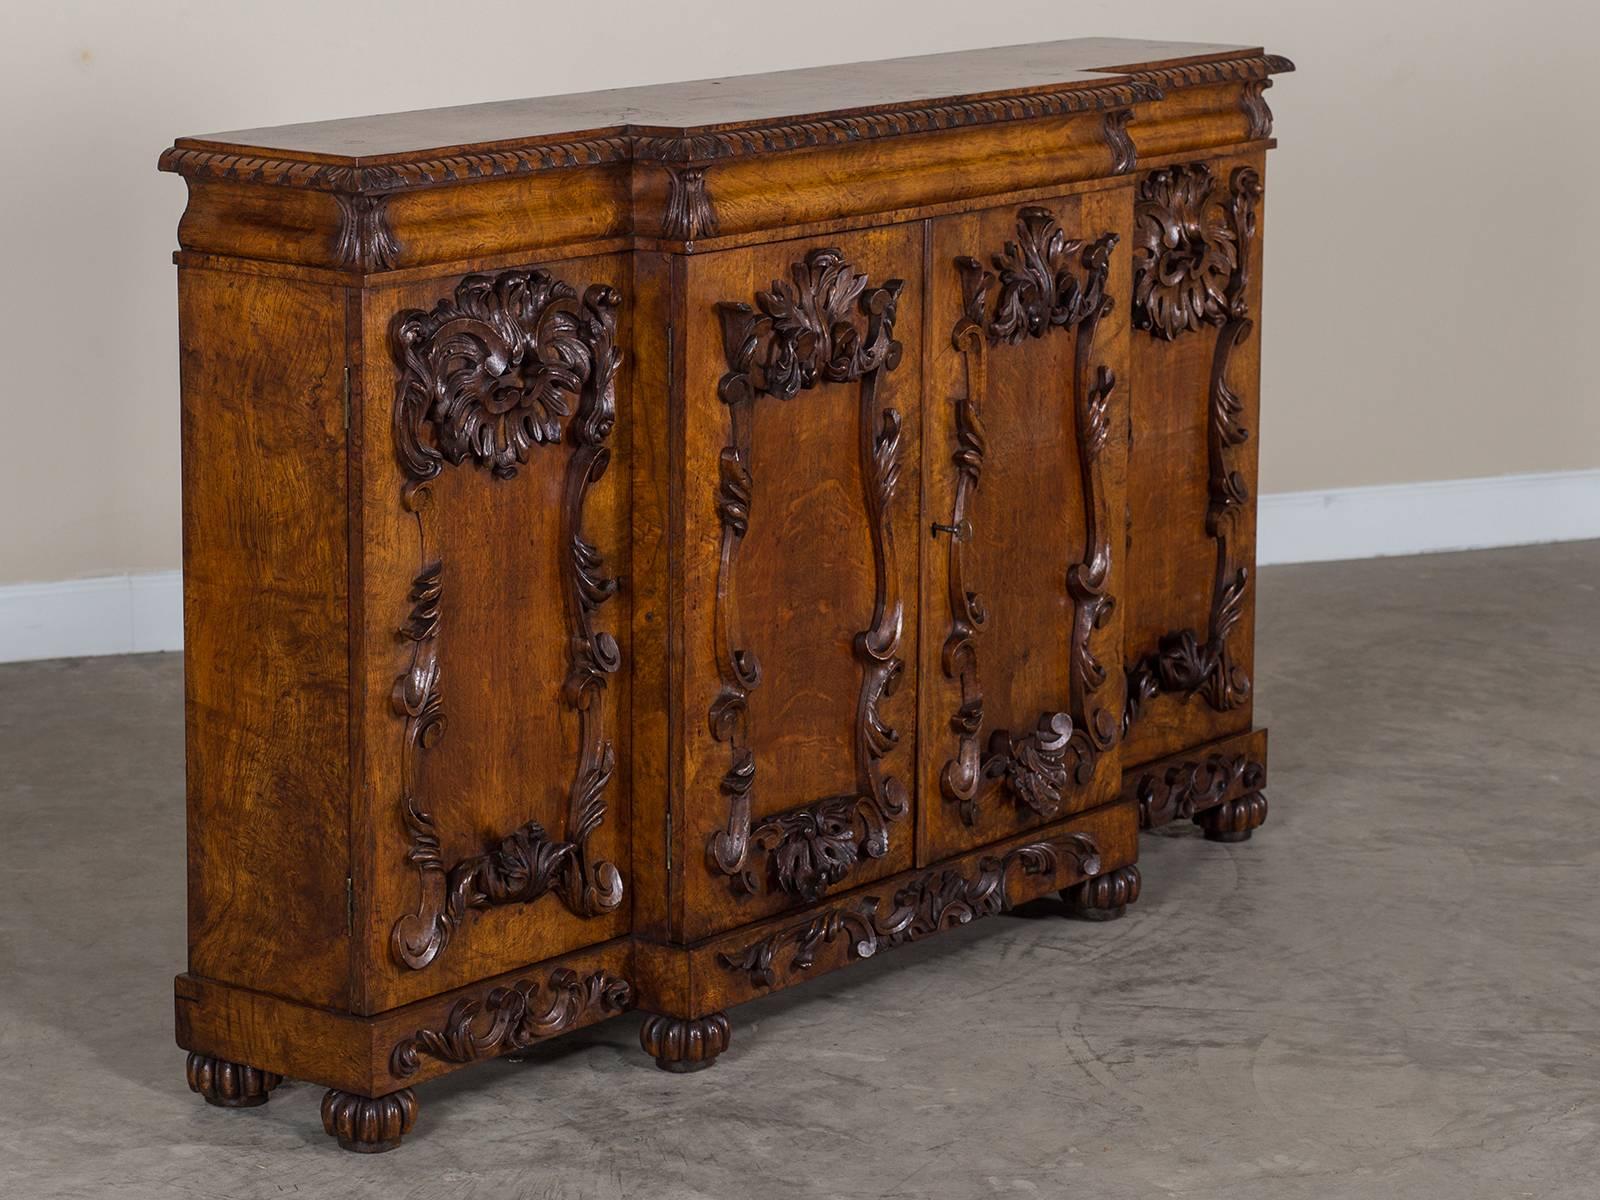 Receive our new selections direct from 1stdibs by email each week. Please click Follow Dealer below and see them first!

The elegantly extravagant carvings seen on this antique English pollard oak credenza buffet, circa 1850 give the facade its